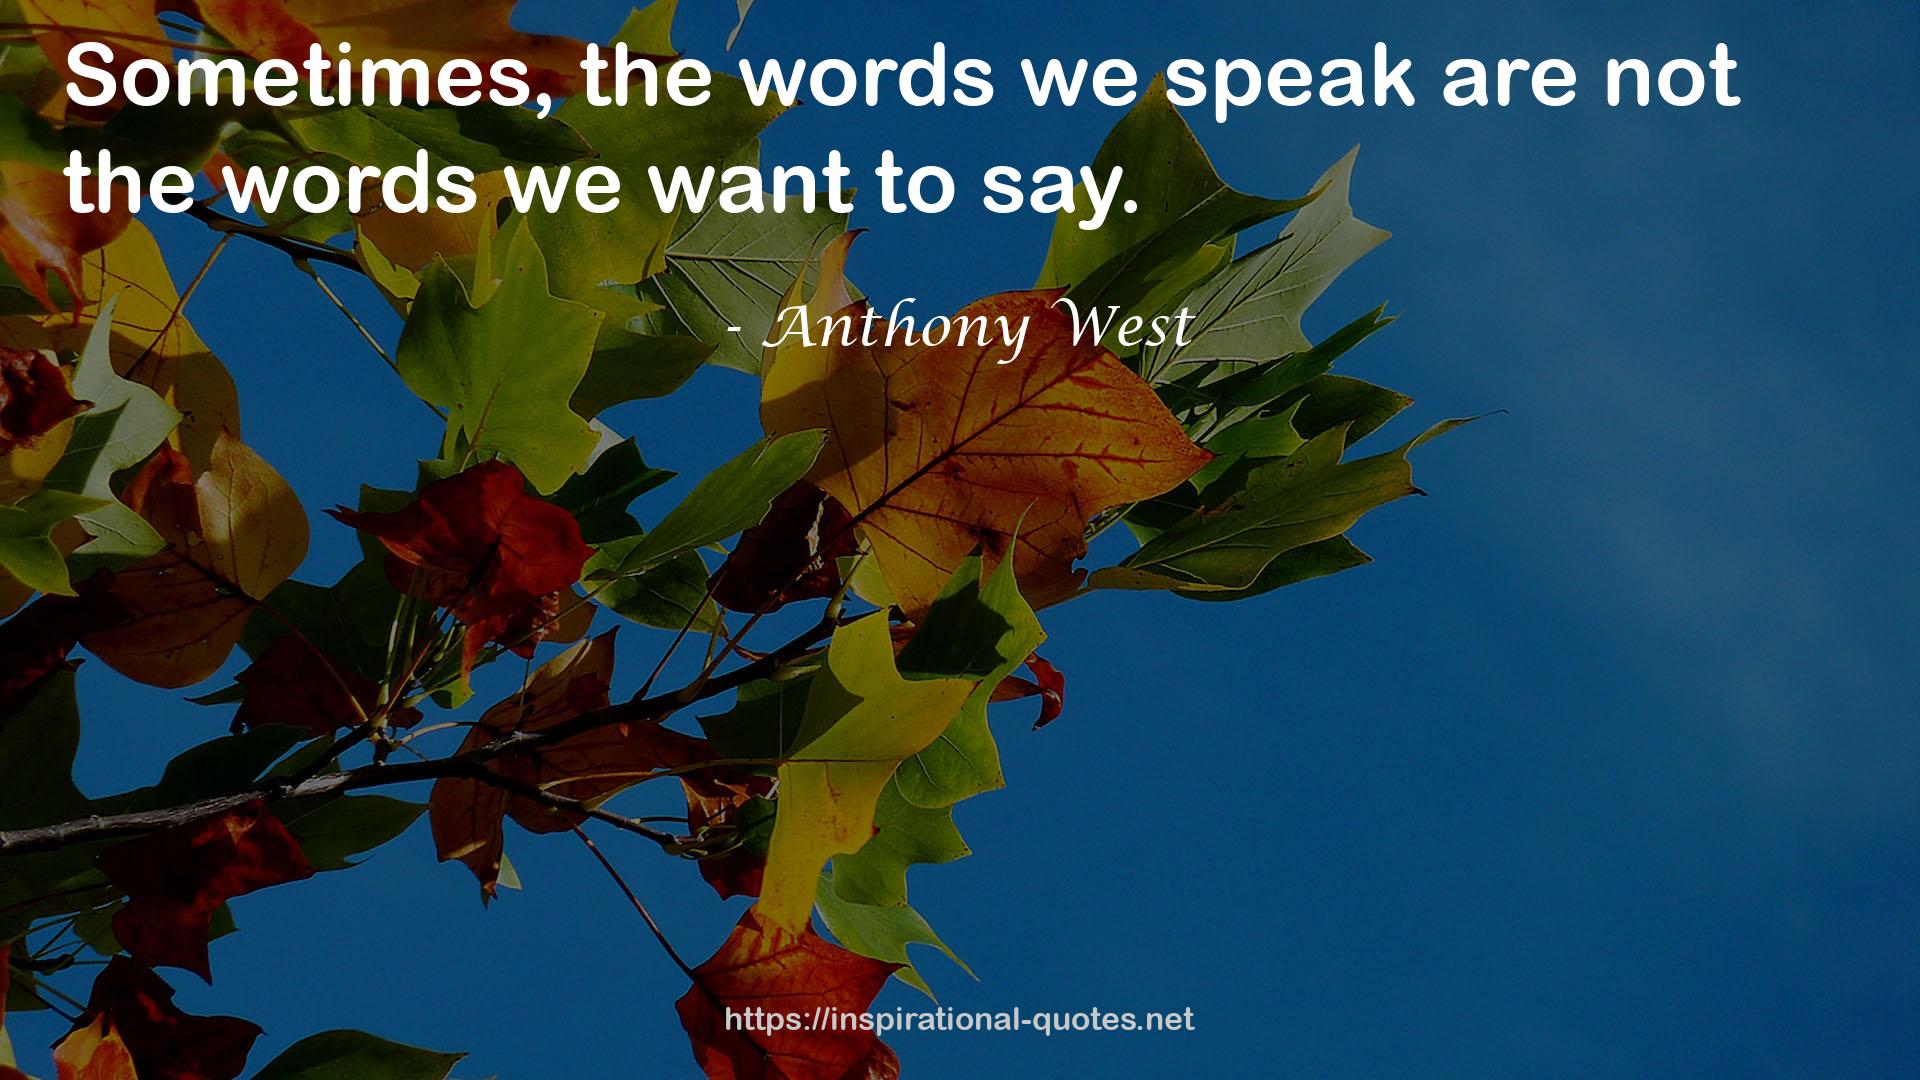 Anthony West QUOTES